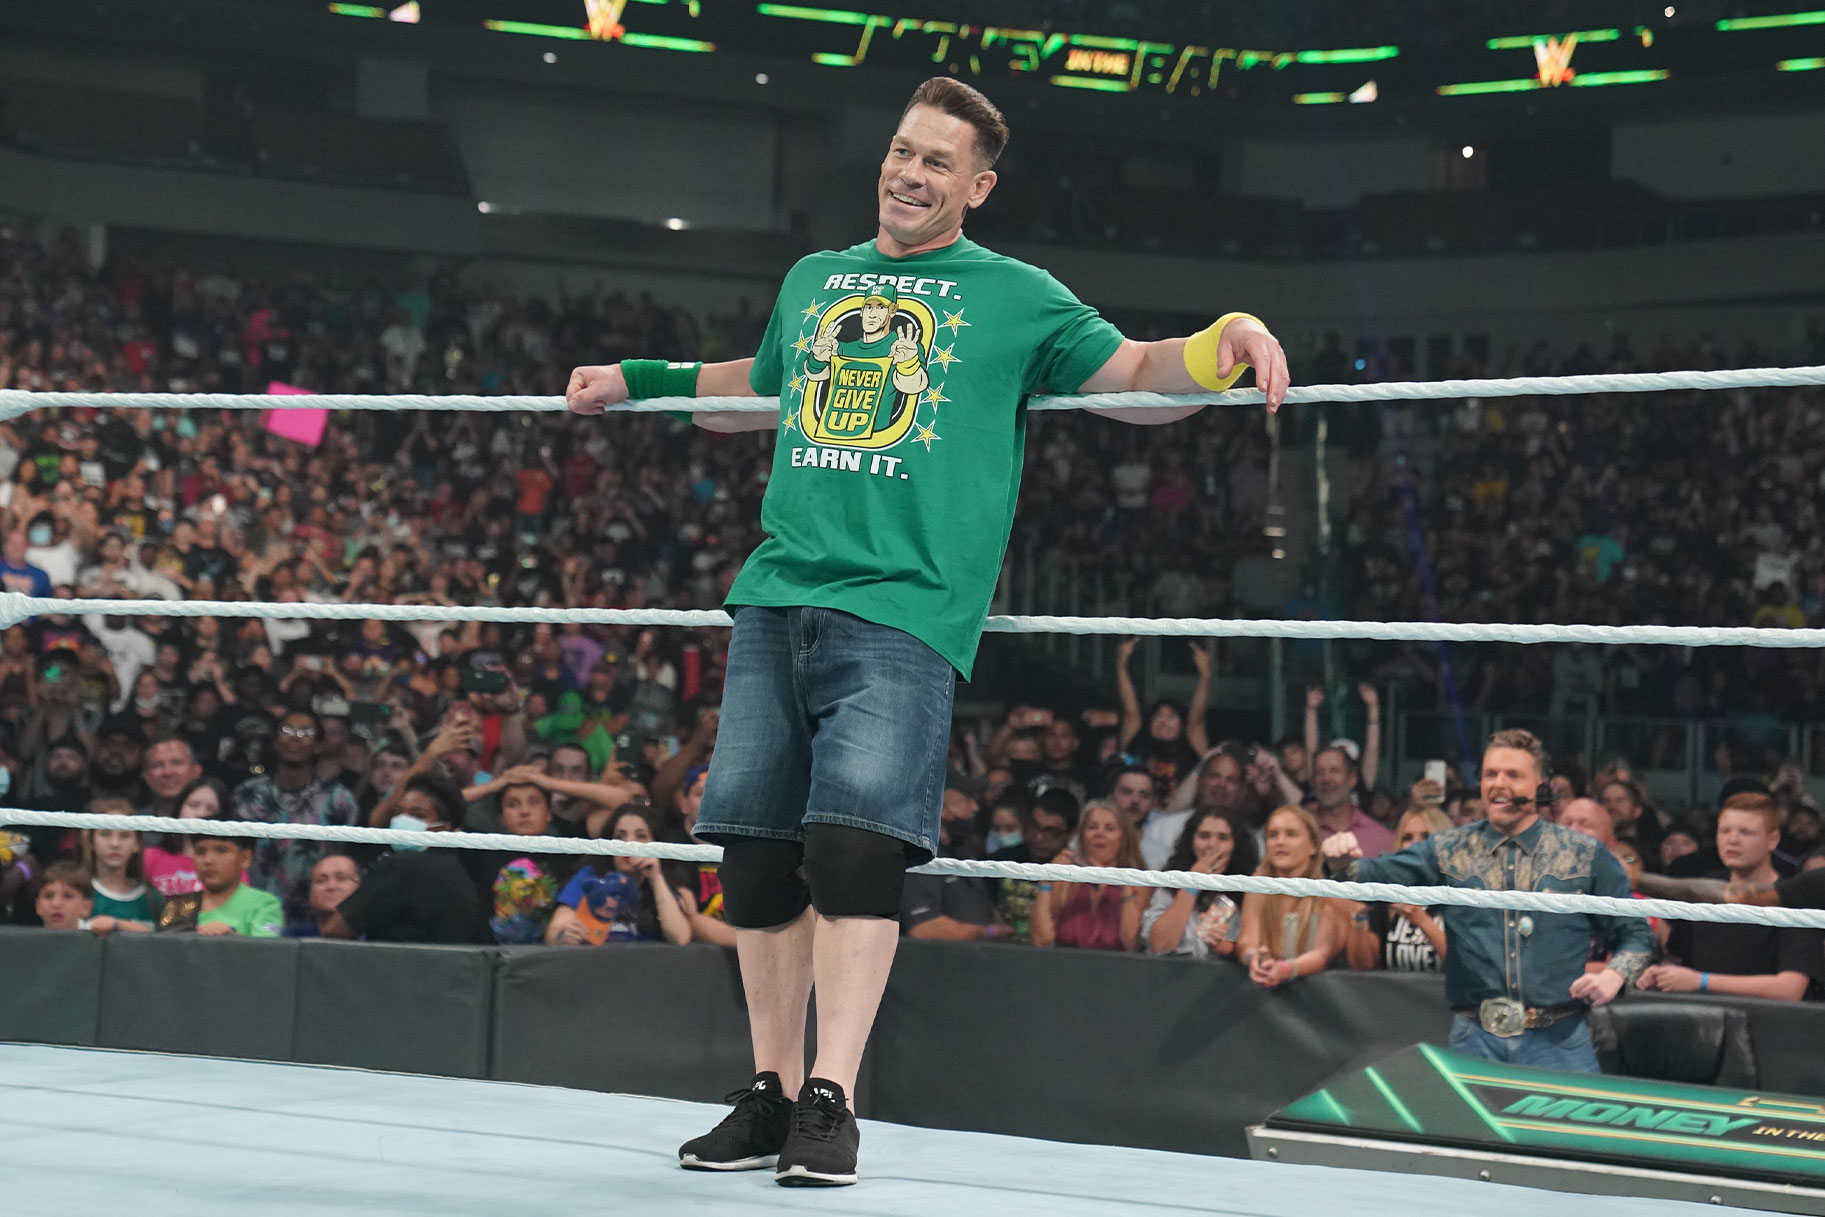 Why Does John Cena Wear Jorts When In The WWE Ring? USA Insider